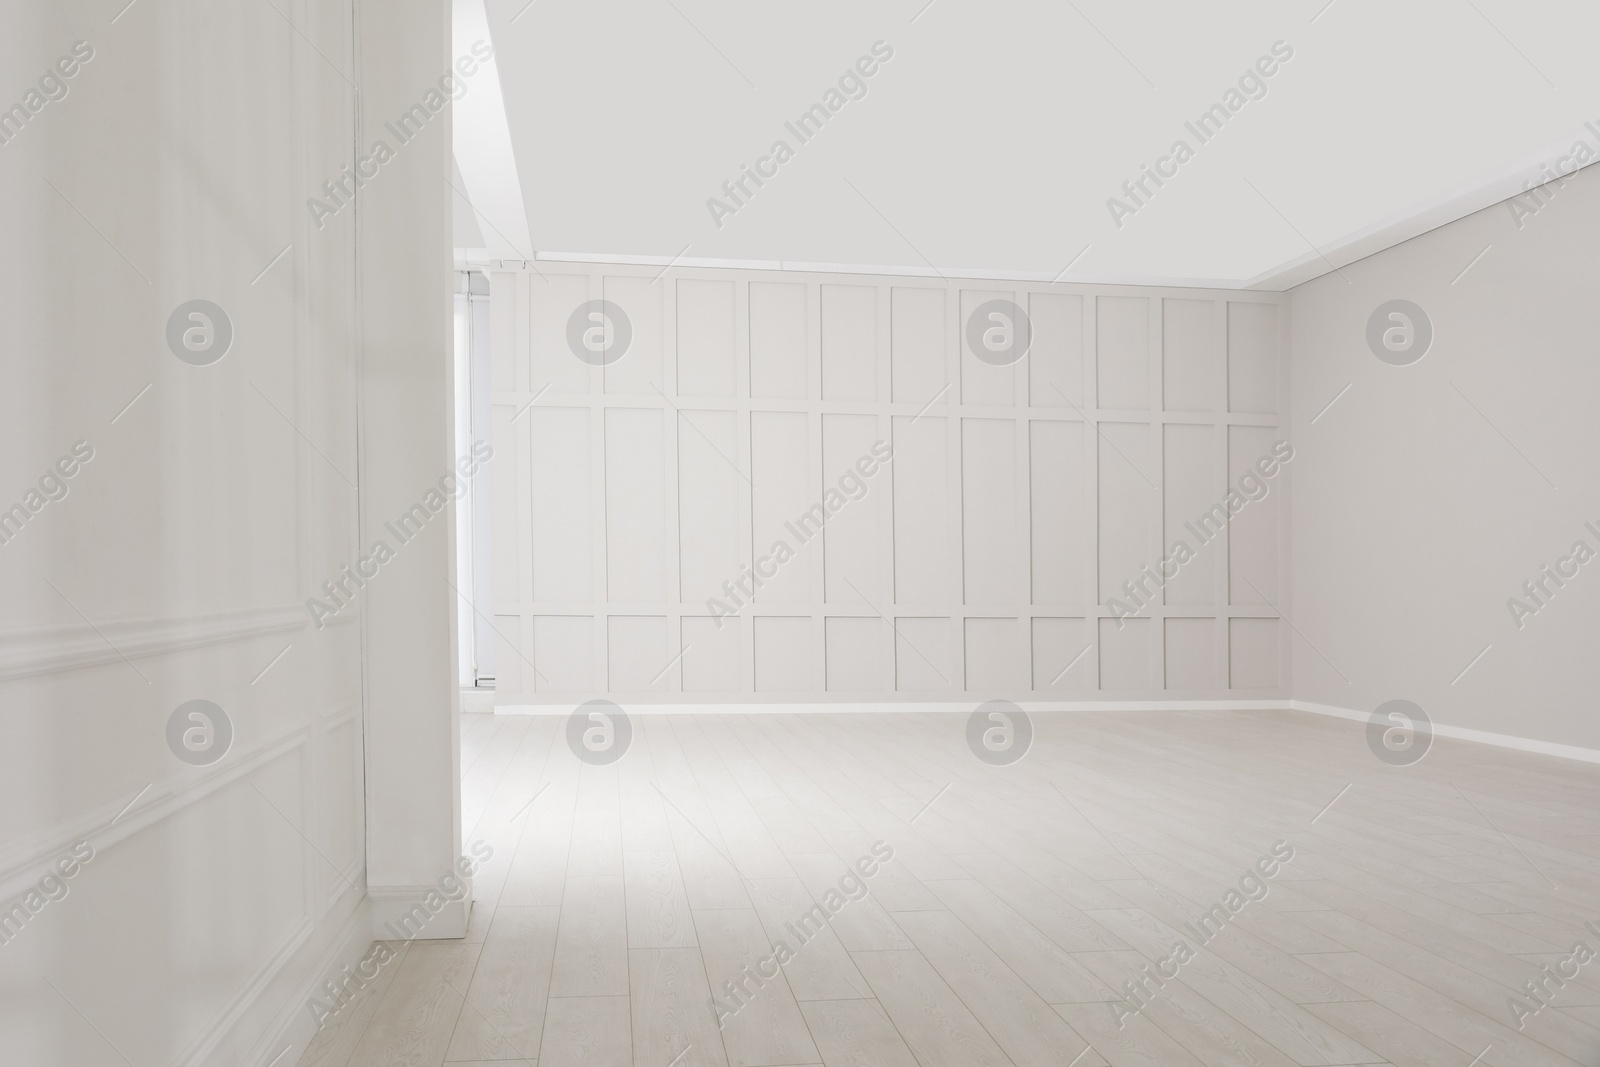 Photo of Empty room with beige walls and laminated flooring